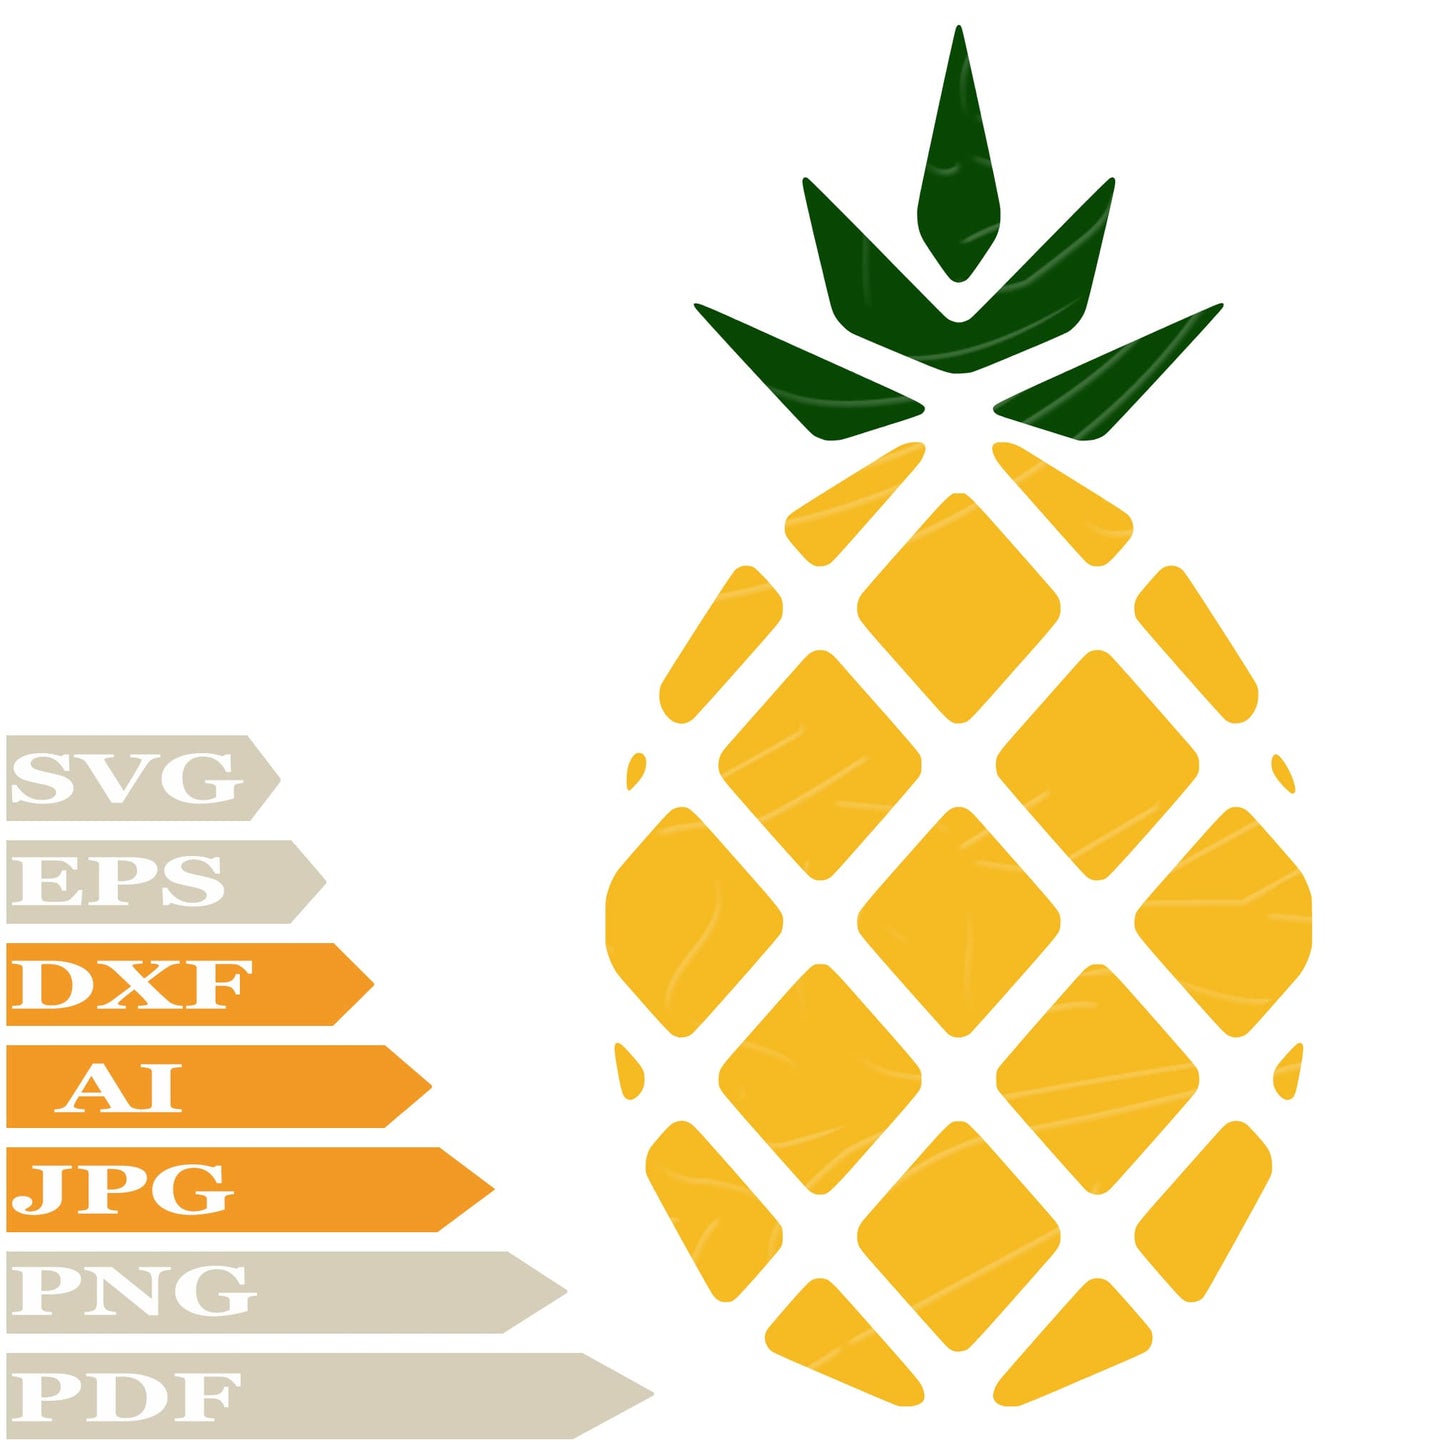 Pineapple SVG, Tropical Pineapple SVG Design, Fuit Pineapple Vector Graphics, Tropical Pineapple For Cricut, For Tattoo, Clip Art, Cut File, T-Shirts, Silhouette, All Available